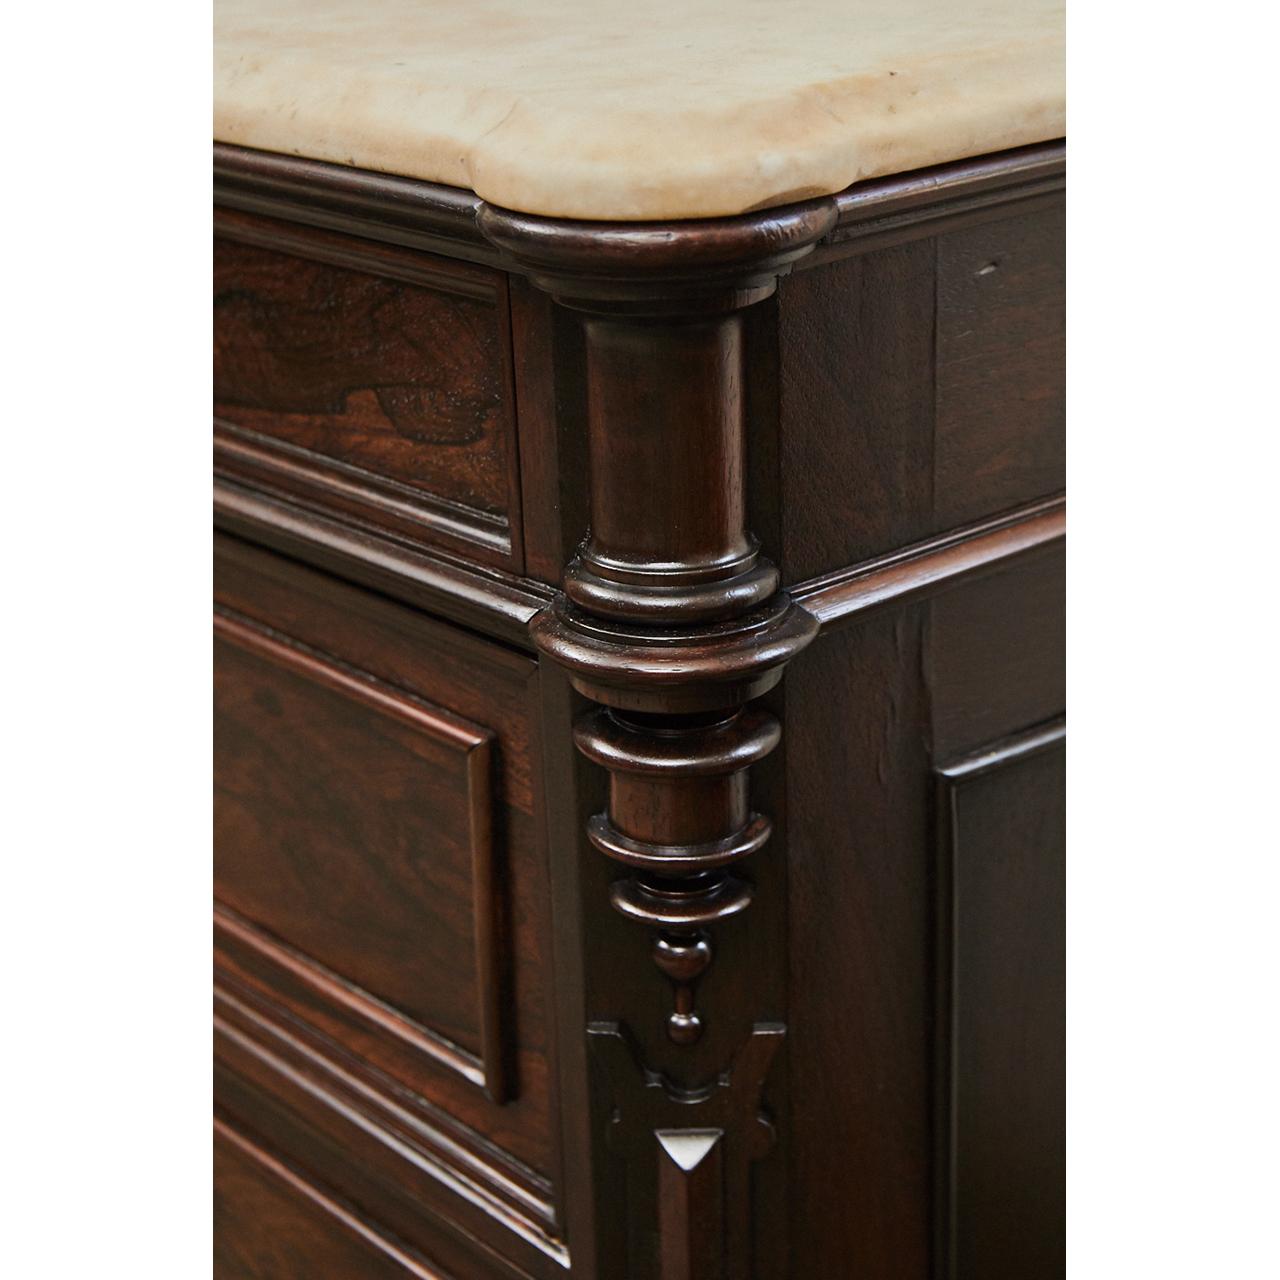 European Victorian Marble-Top Commode